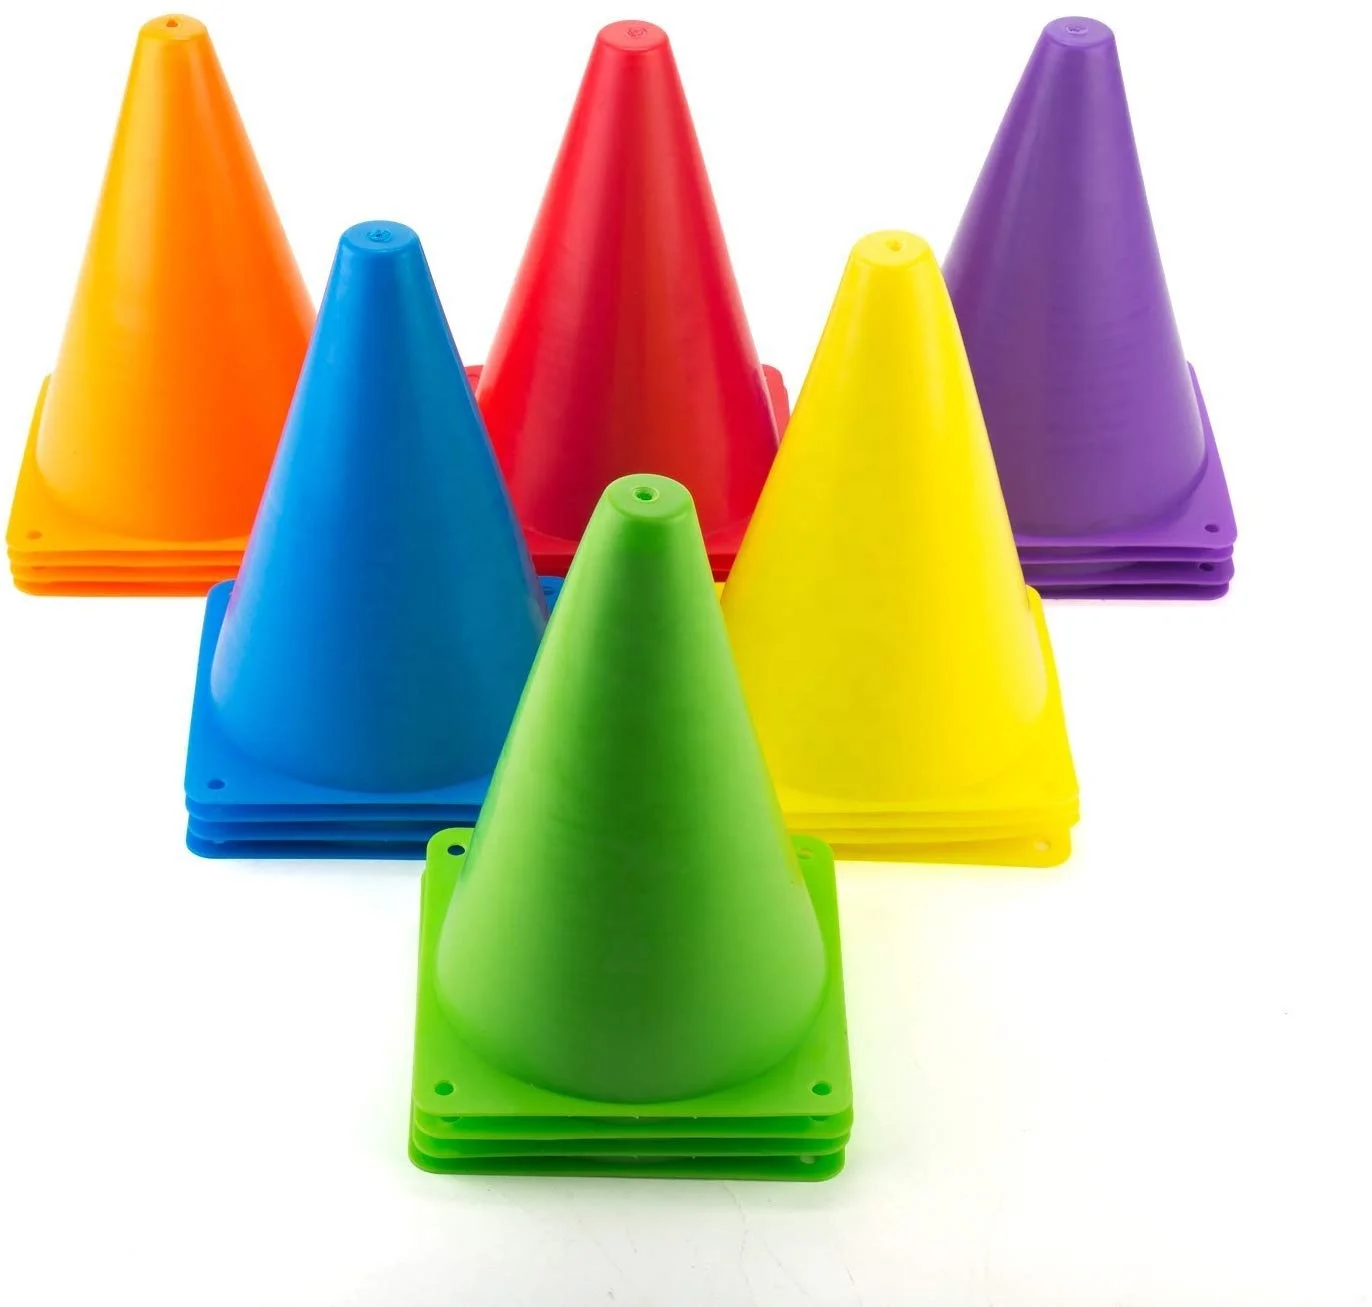 

LXY-001 Wholesale 7Inch Plastic Soccer Agility Marker Cones for Sport Training, Yellow, red, blue, fluorescent green, white, green, orange